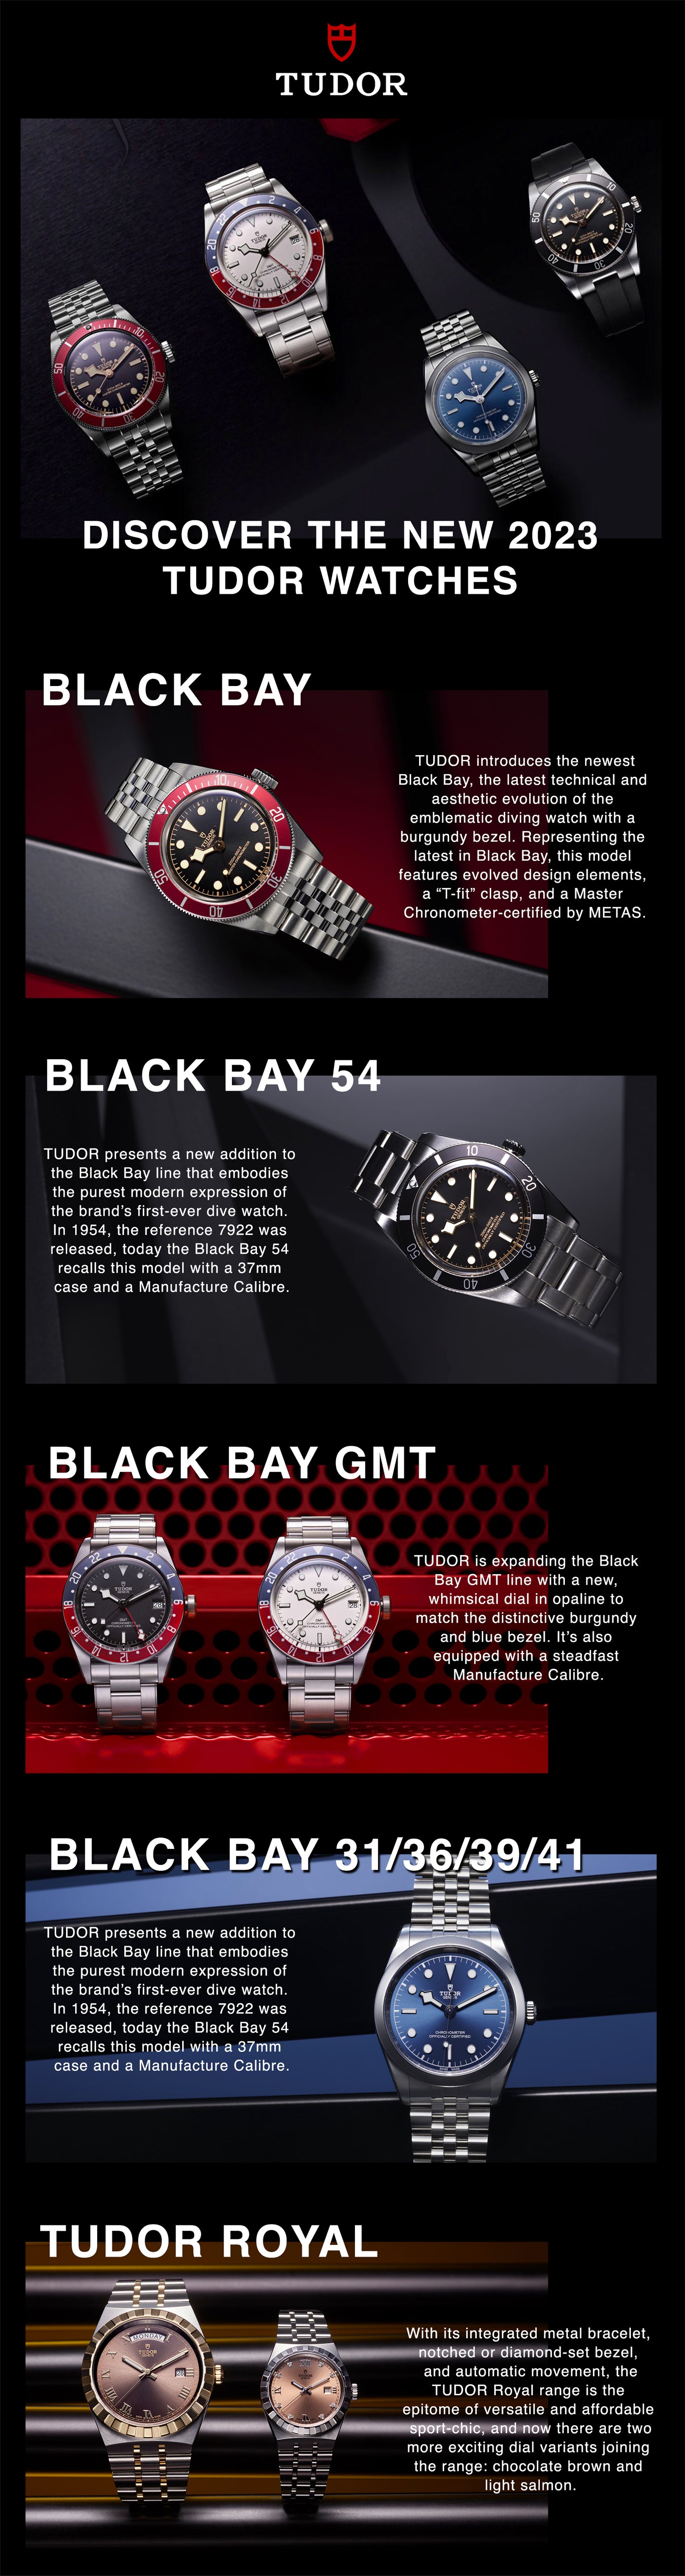 New From TUDOR | 2023 Watches & Wonders